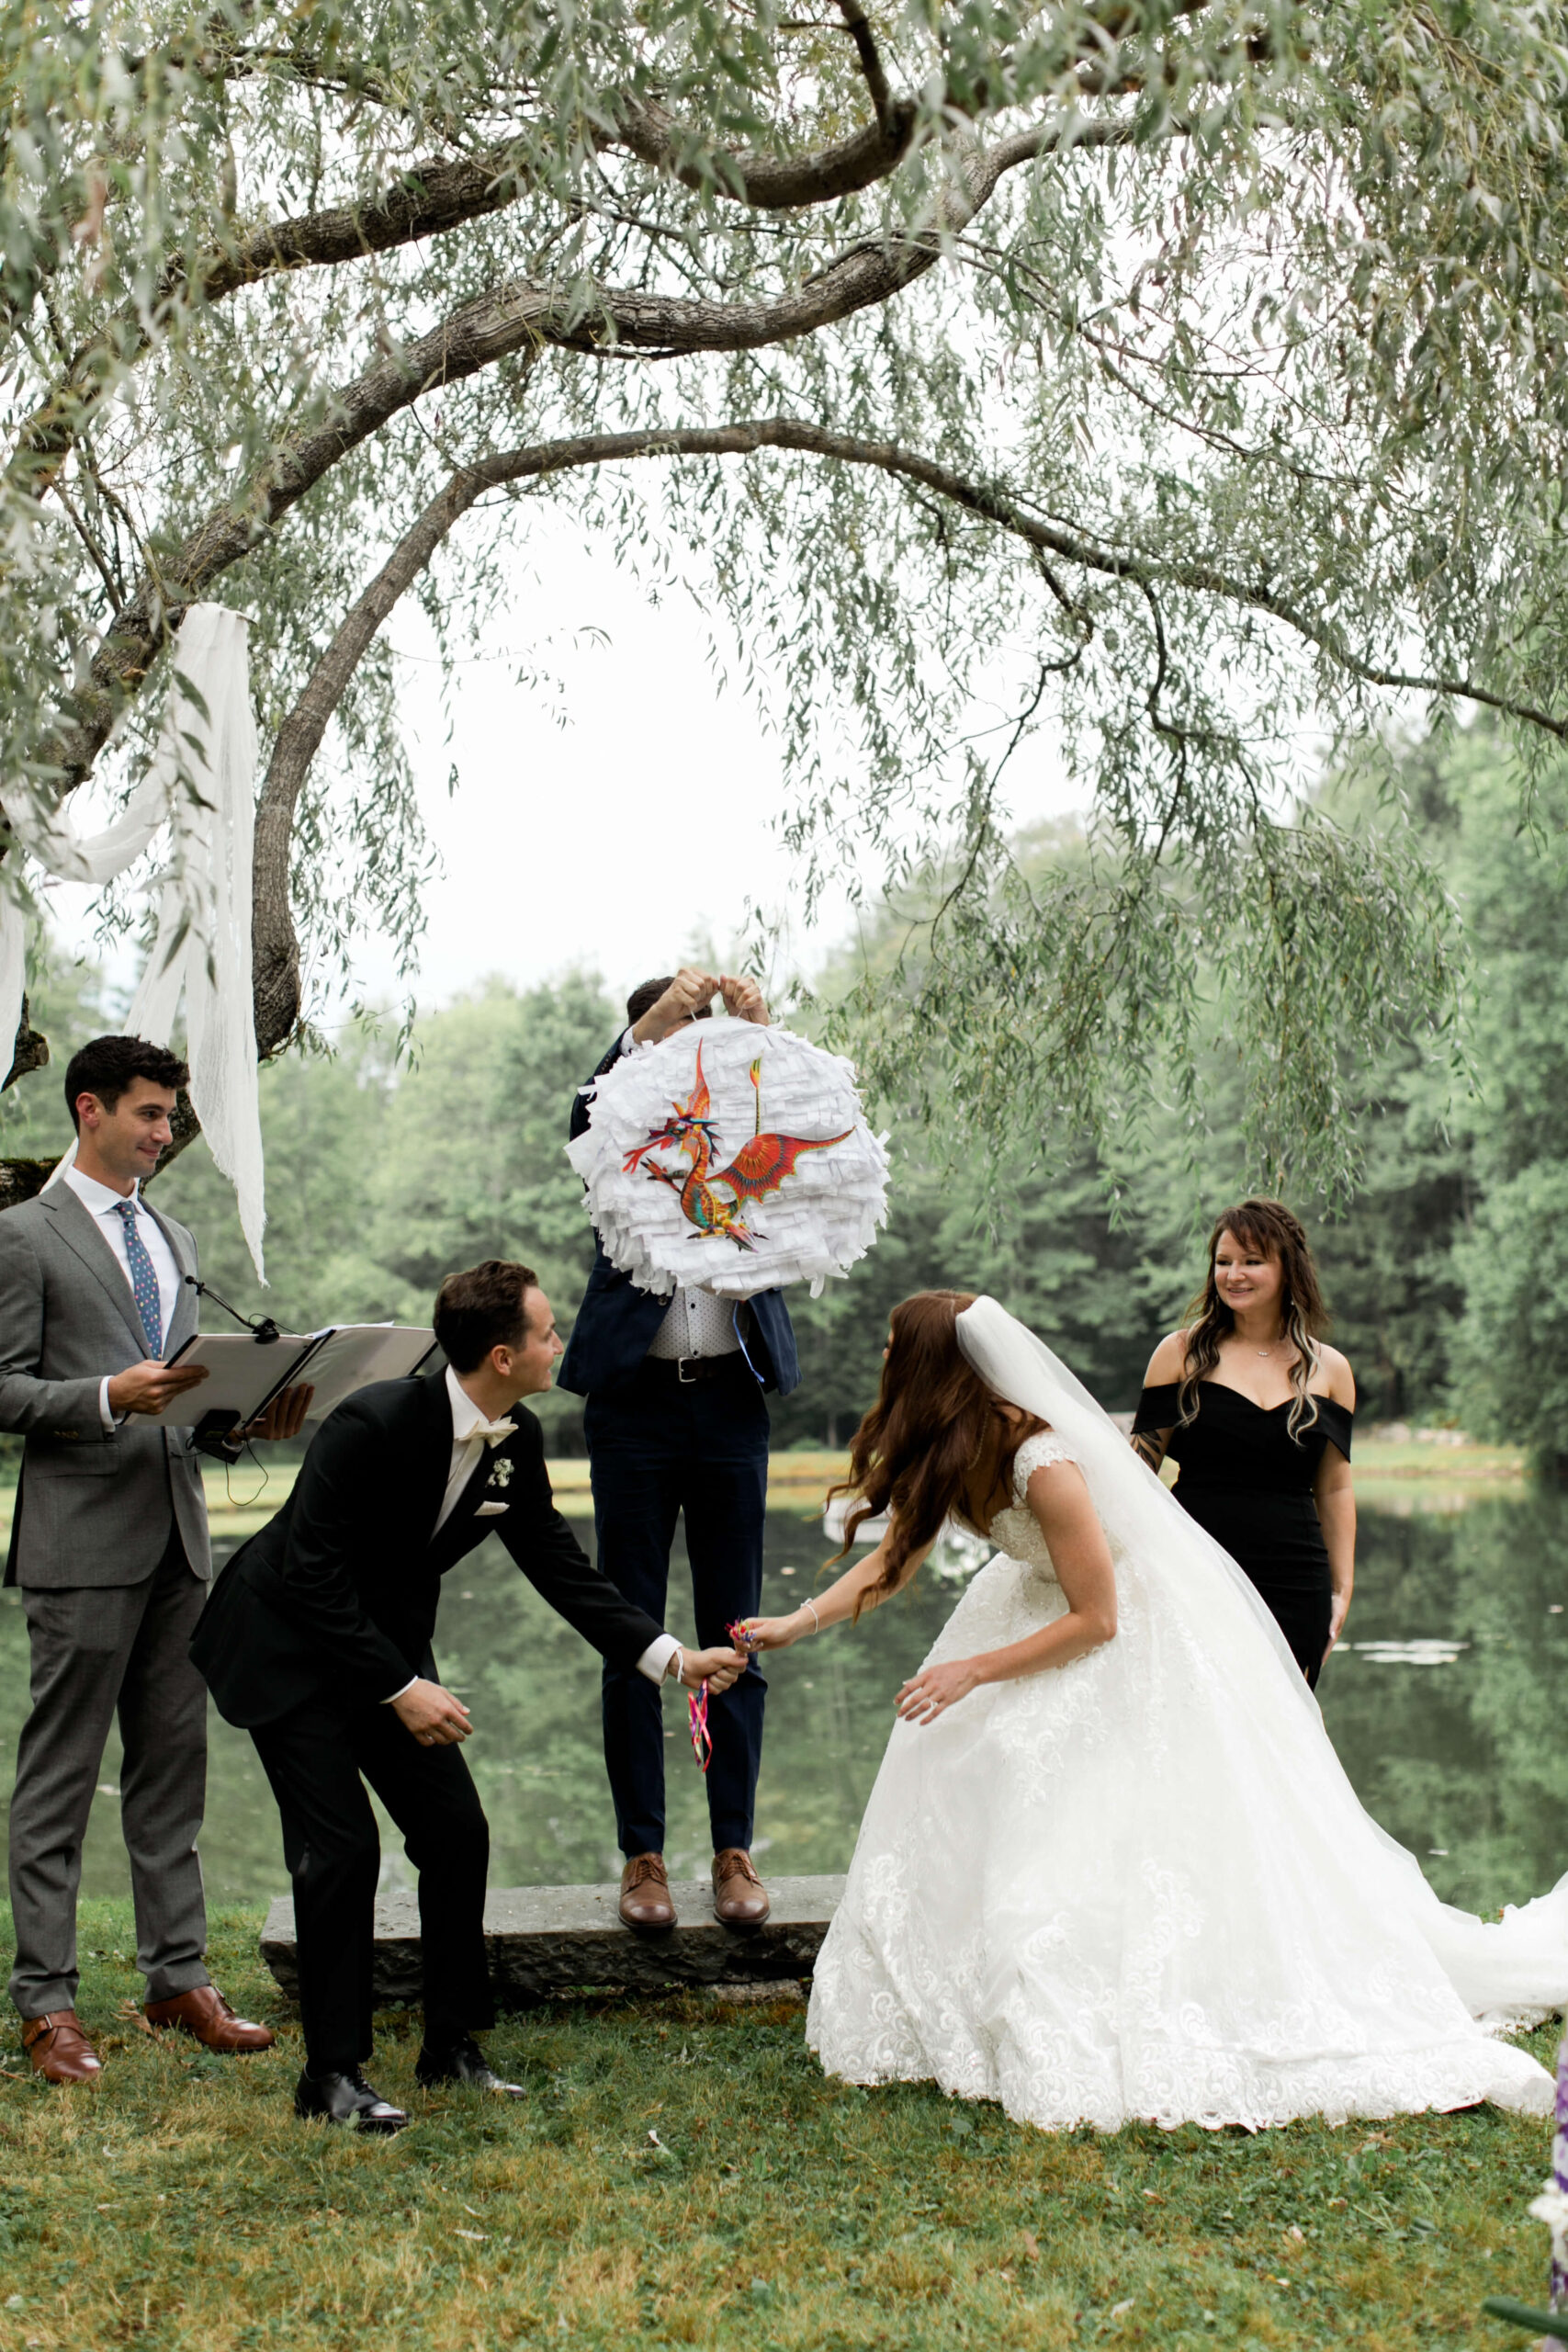 Bride and groom opening a pinata during the reception of their outdoor Connecticut wedding.